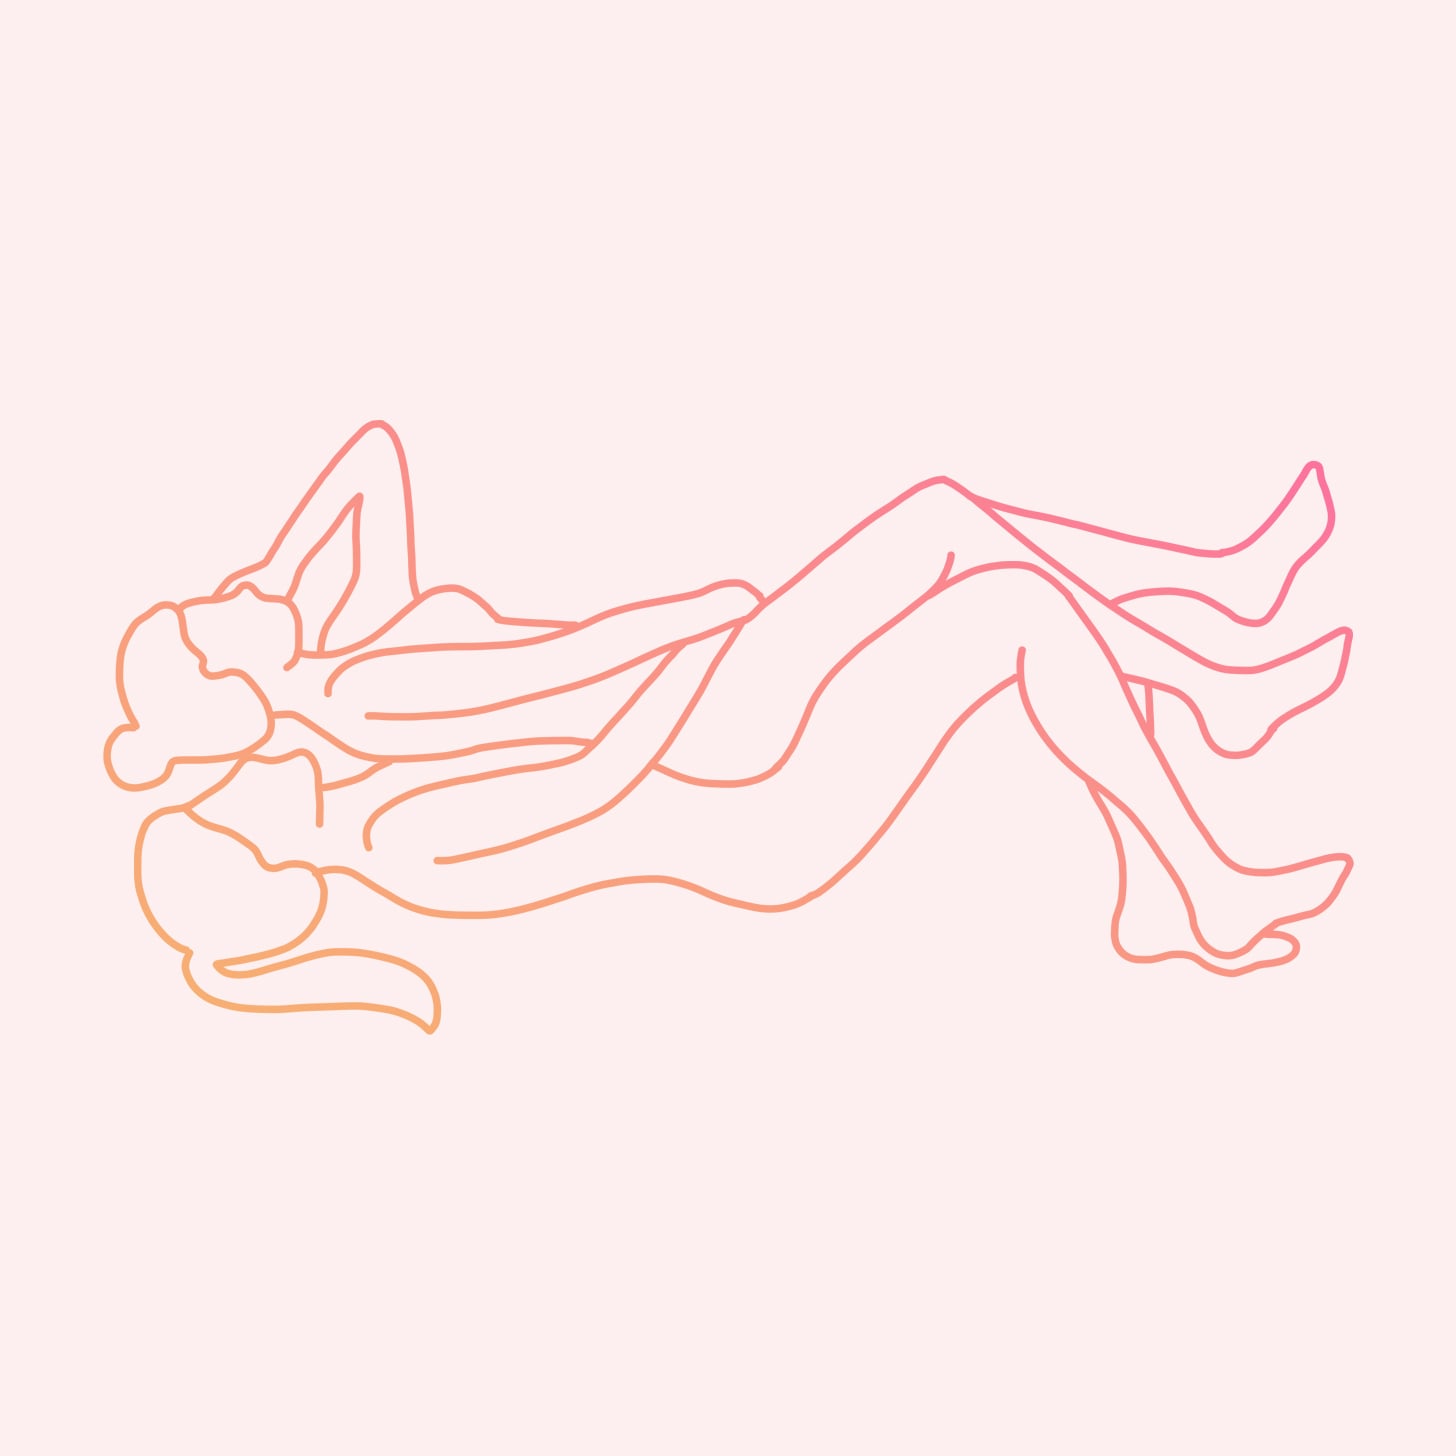 The Spooning Sex Position